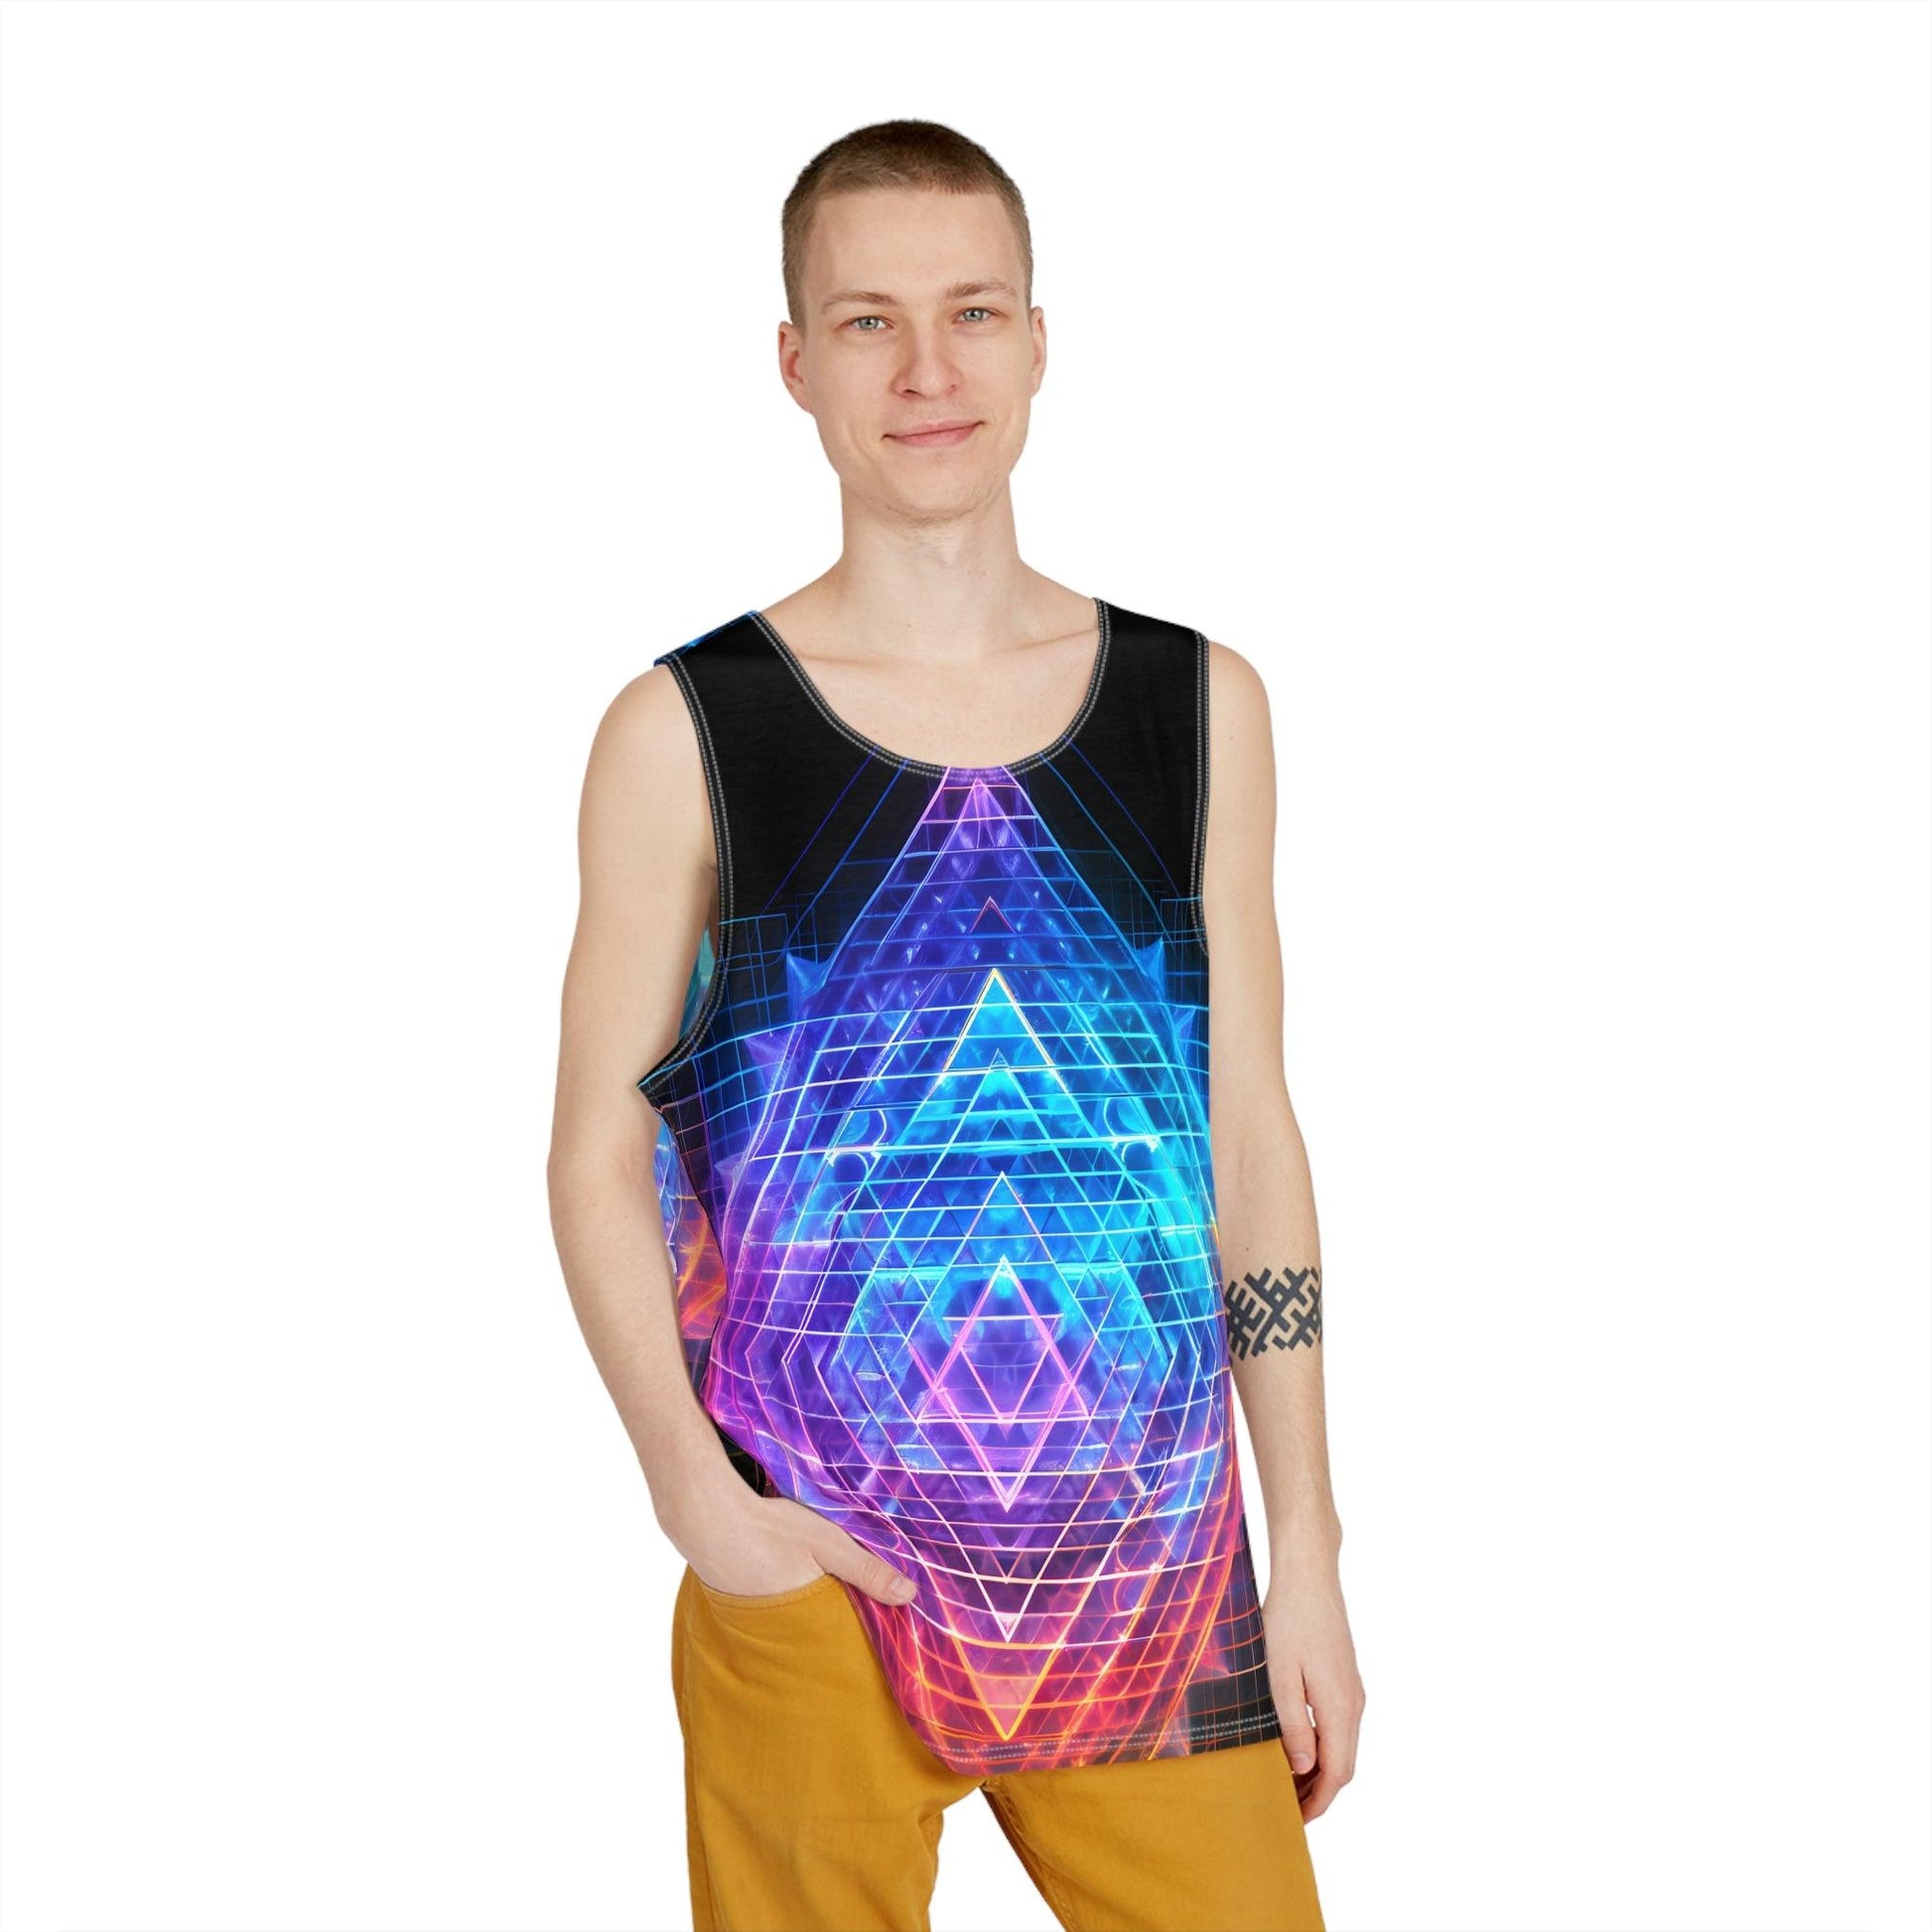 Sri Yantra 3D v2.1 Sacred Geometry Octane Colorful Symmetrical Sublimation Tank Top for Him - Stylish Comfort for Festival Street Activewear and More - Alchemystics.org